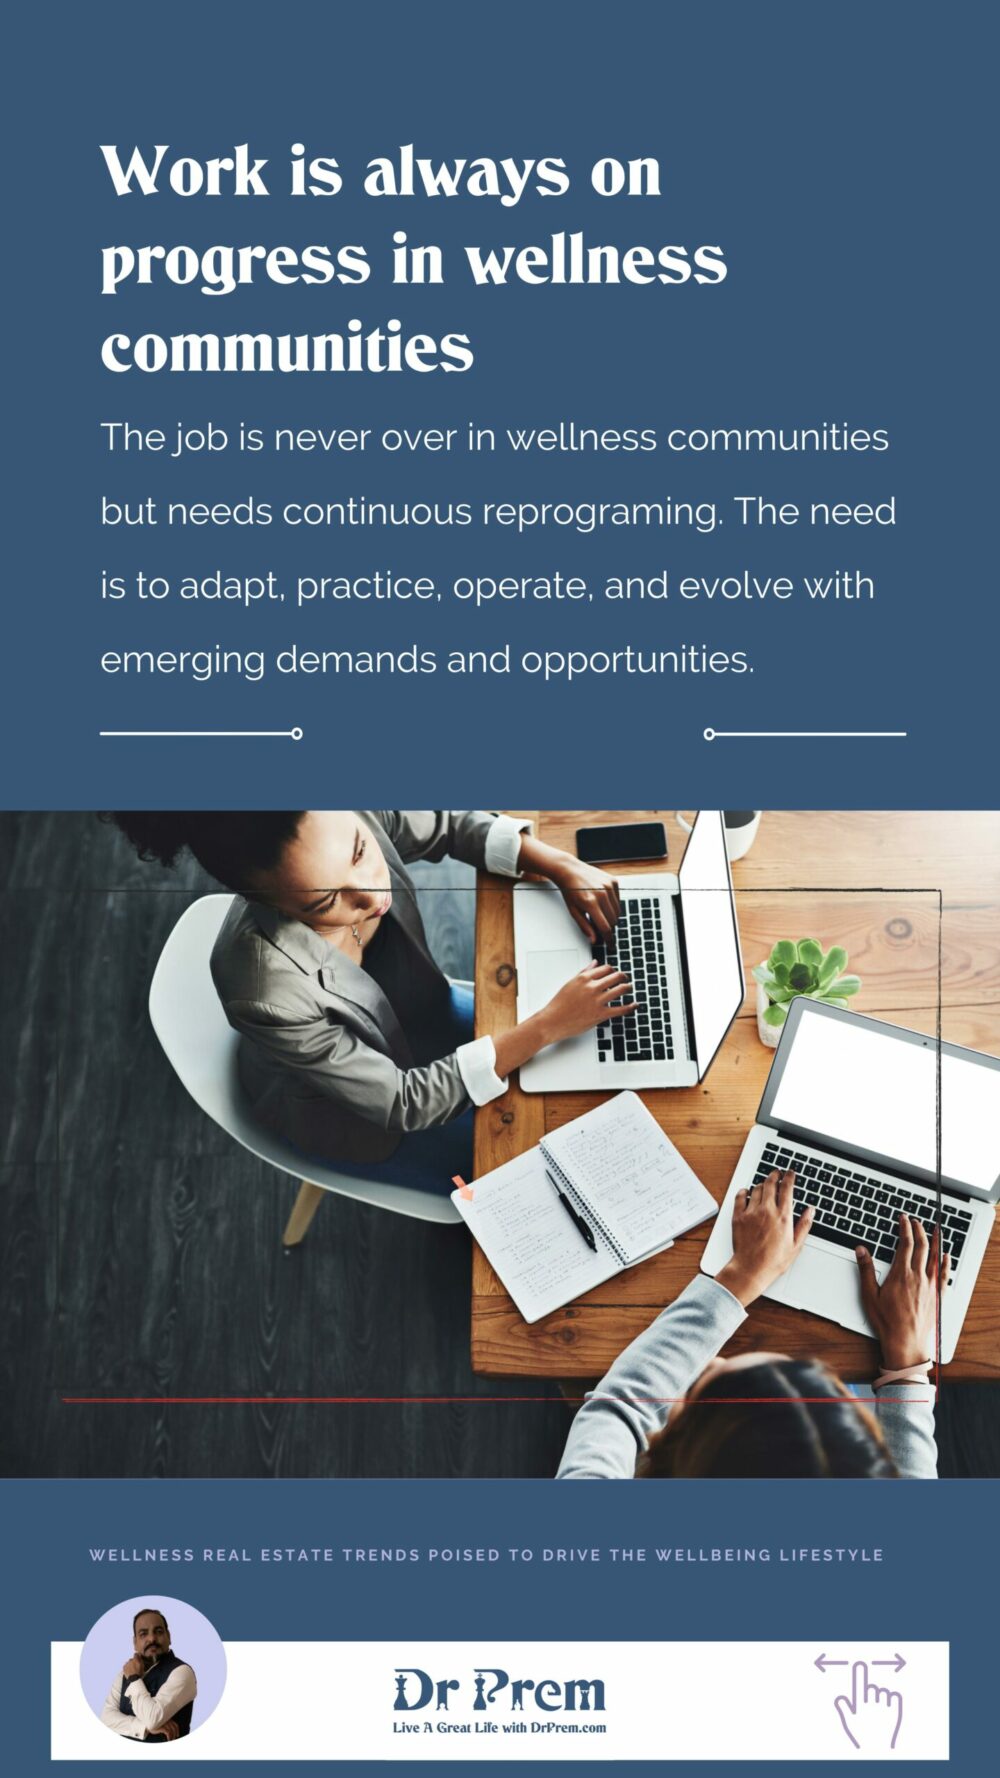 Wellness Real Estate Trends Poised To Drive The Well-Being Lifestyle10